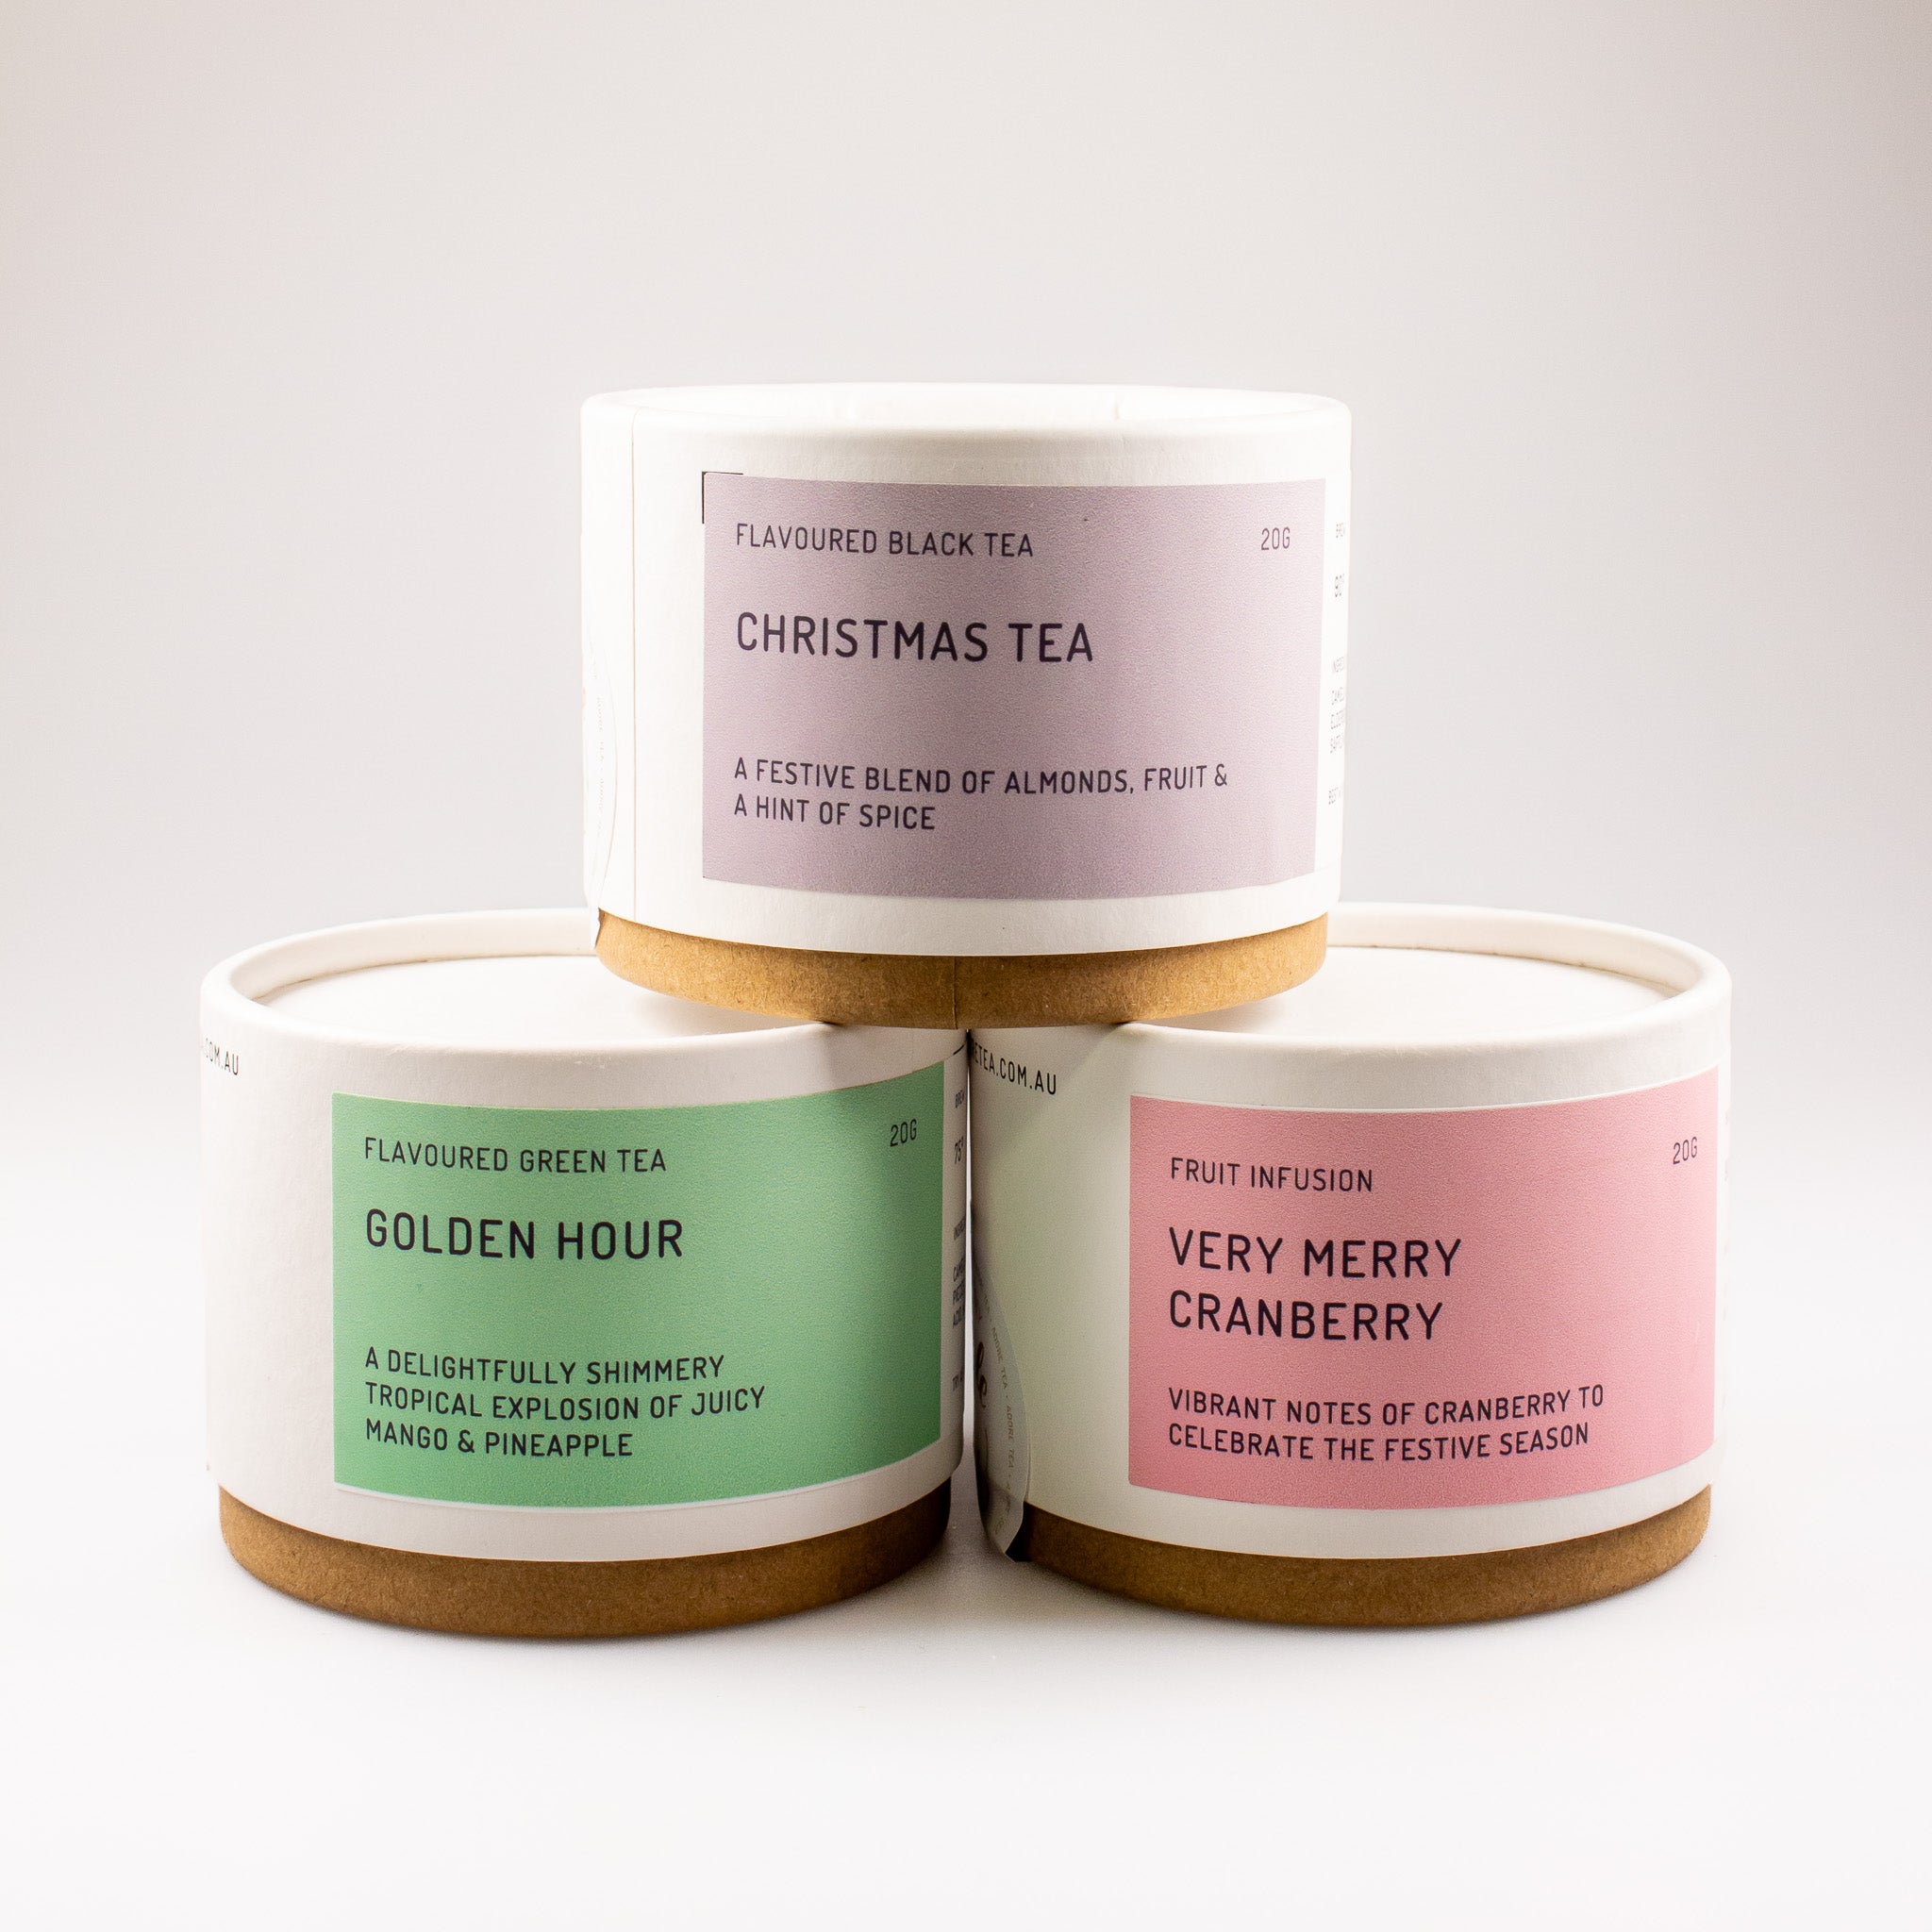 The Ultimate Adore Tea Christmas Pack